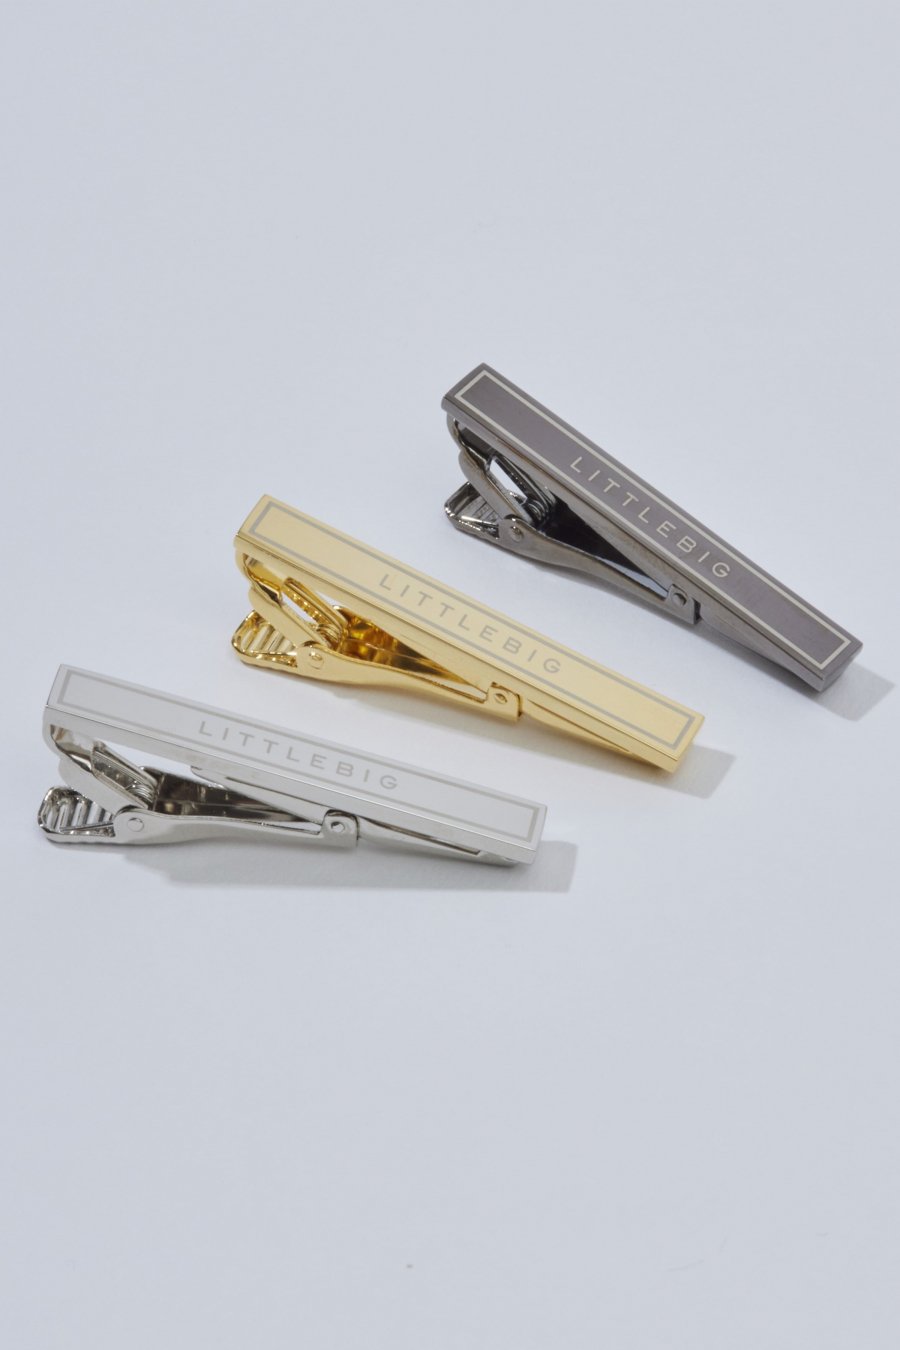 LITTLEBIG（リトルビッグ）のTie Clip Silver or Gold or Black 